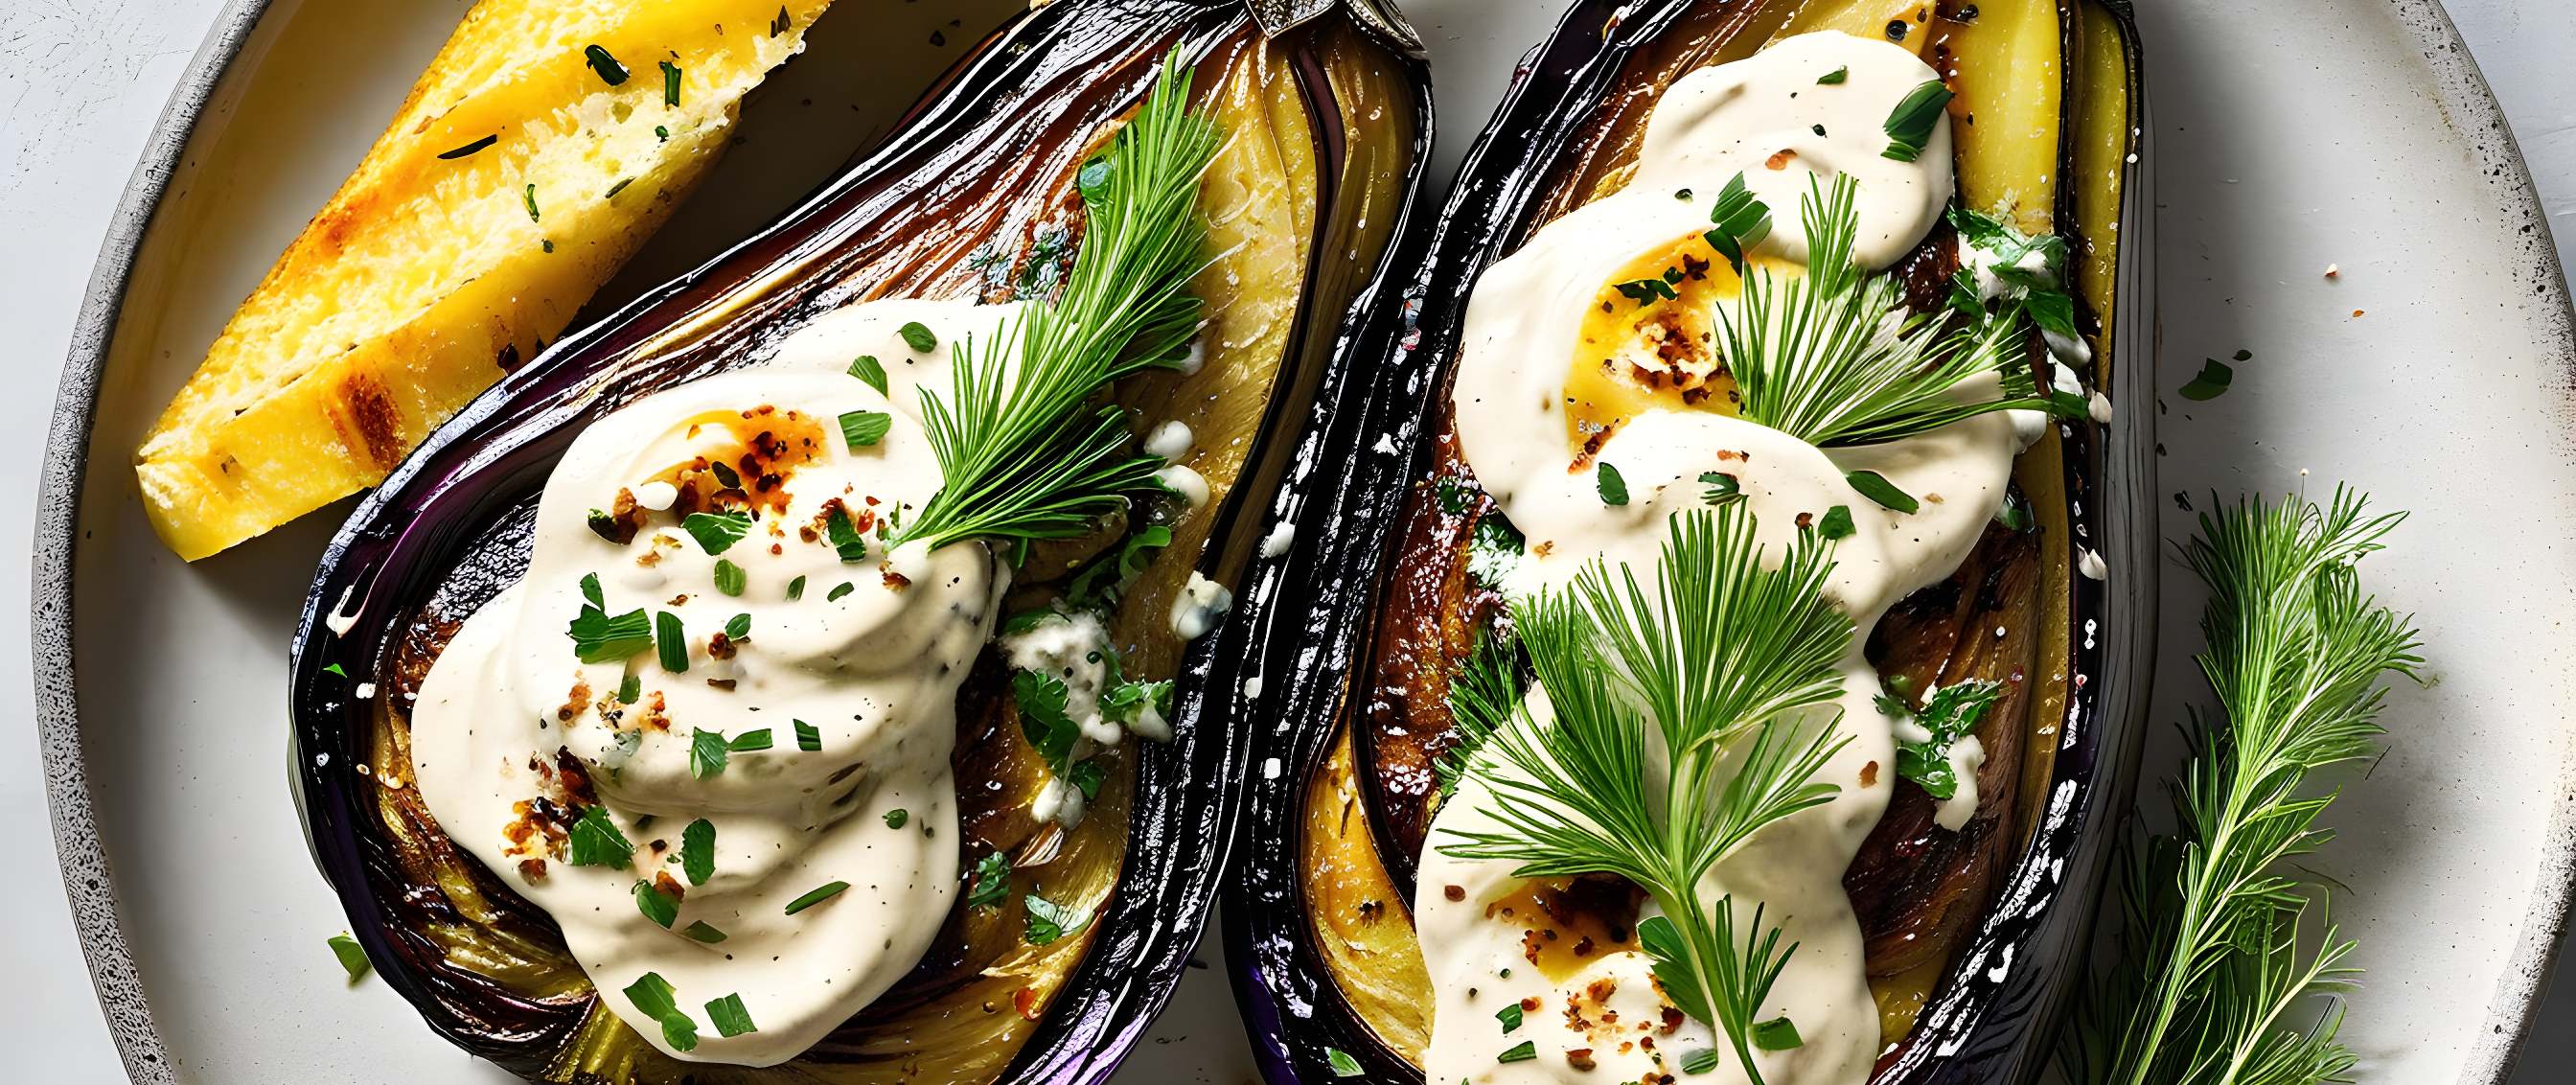 whole-roasted-charred-eggplant-with-dill-and-tahini